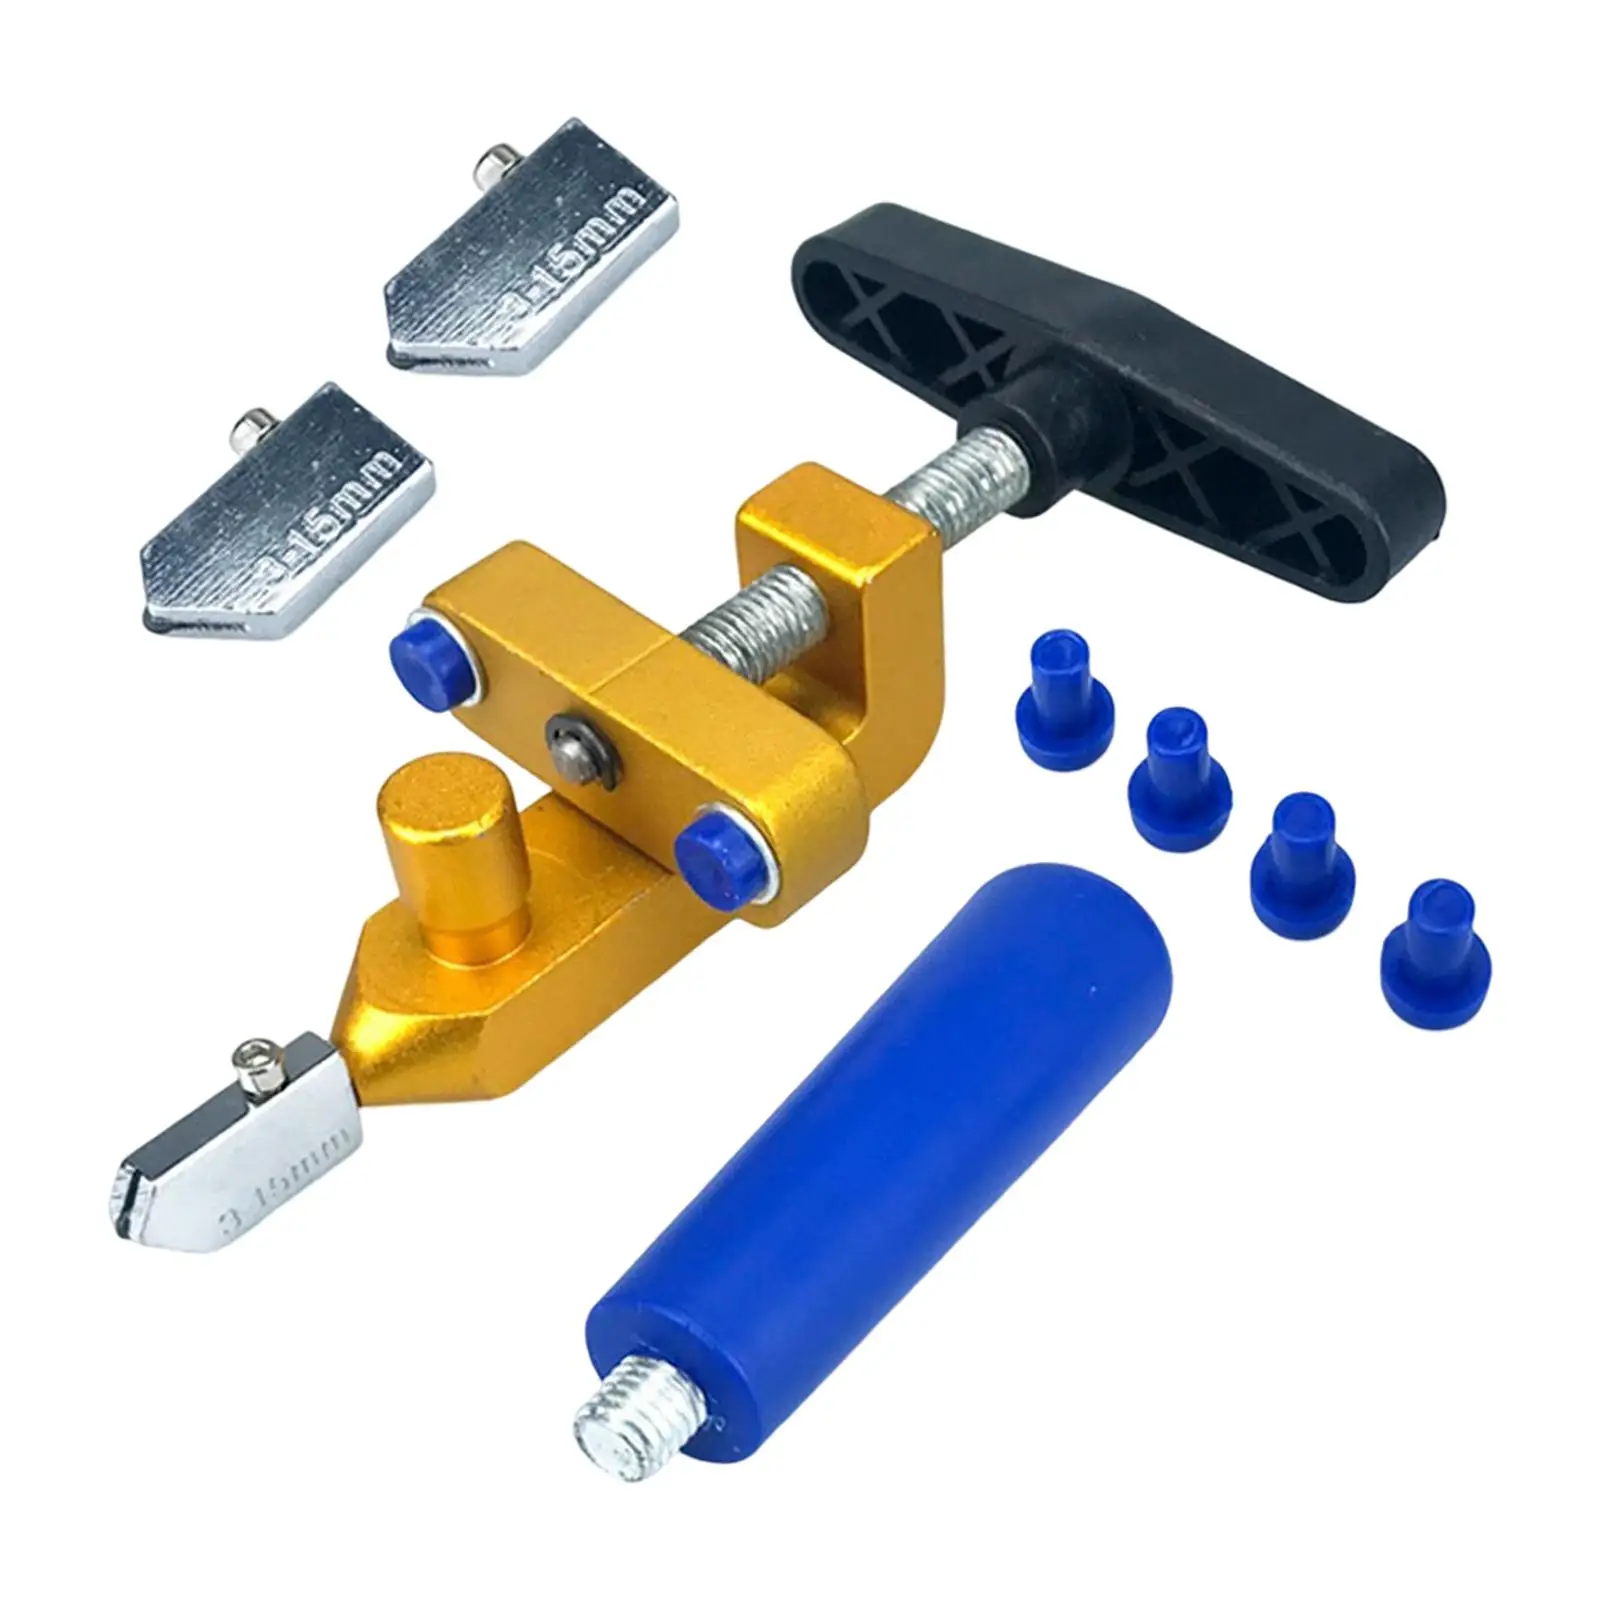 Manual Ceramic Tile Opener Lightweight Construction Tool Cutting Machine Hand Tools Portable Glass Cutter for Thick Glass